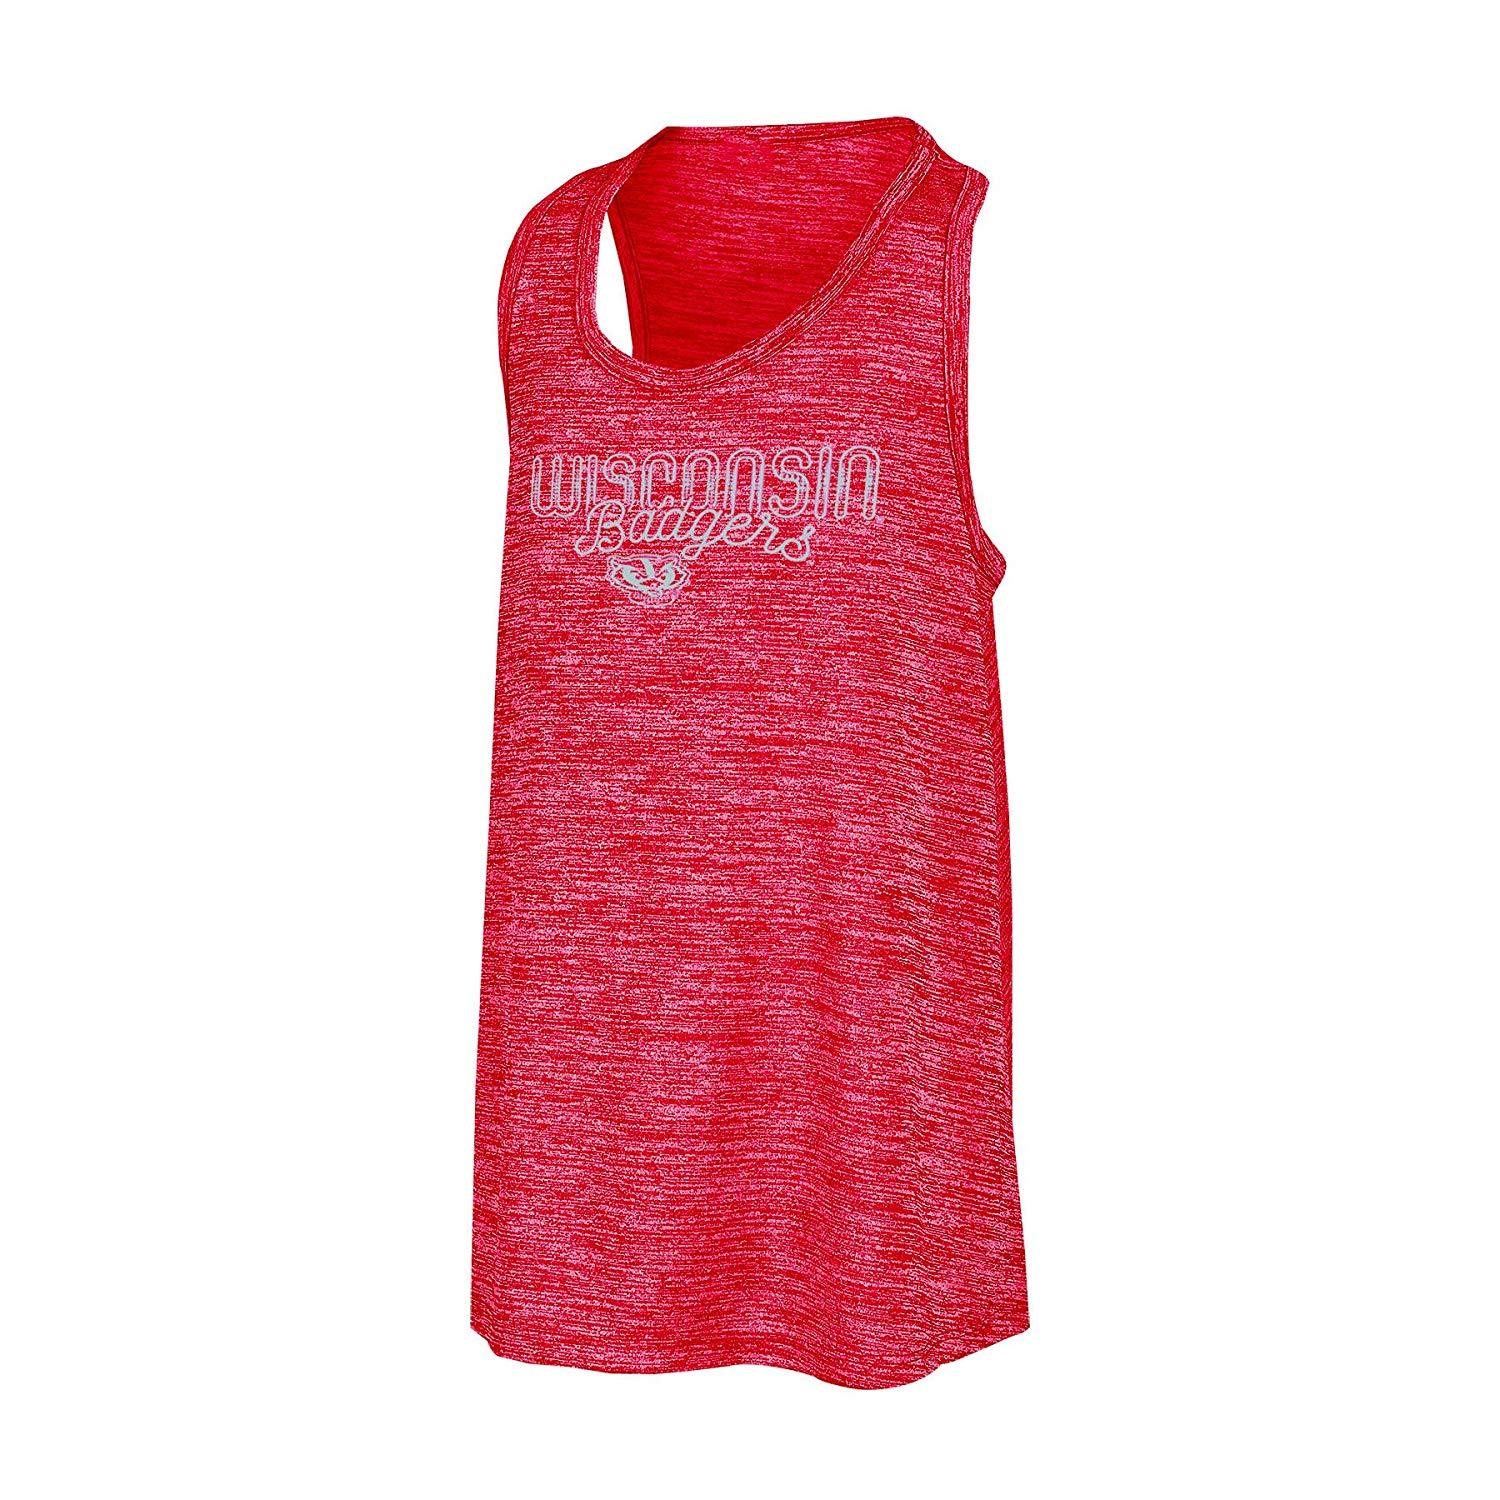 Champion NCAA Wisconsin Badgers Girls Tank Top Racer Back, Size 